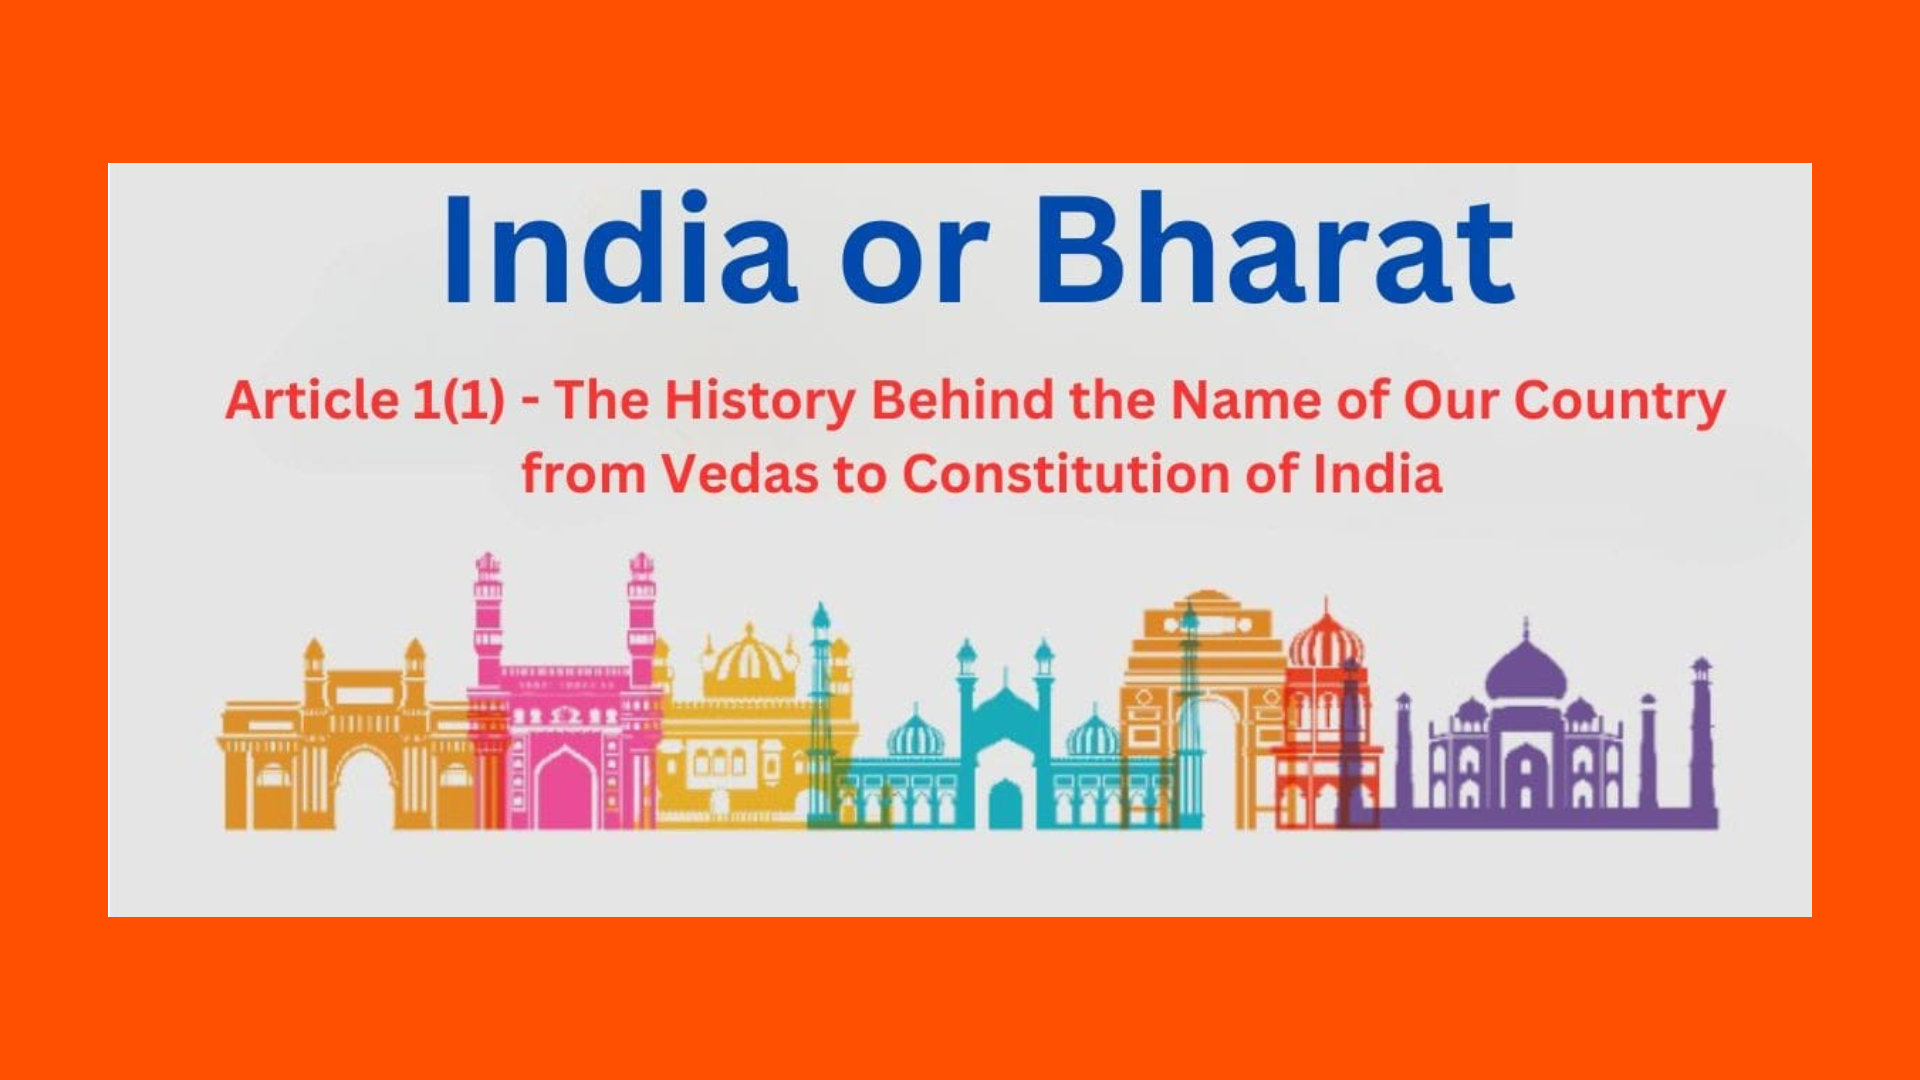 Celebrating Bharat: Embracing India's Rich Heritage 🇮🇳 | Bharat | India | IndianHeritage | UnityInDiversity | BharatHeritage | IndianCulture | BharatIdentity | IndianTraditions | CulturalUnity |  InclusiveIndia | BharatSymbolism | IndianIdentity |  InclusivityMatters | NationalIdentity | DiverseIndia | UnityInDiversity | IndianCulture | BharatVsIndia |  Inclusivity | DiverseNation | CulturalIdentity |  HistoricalSignificance | NationalHeritage |  CulturalIdentityDebate | IndianHeritage |  GovernmentDecision |